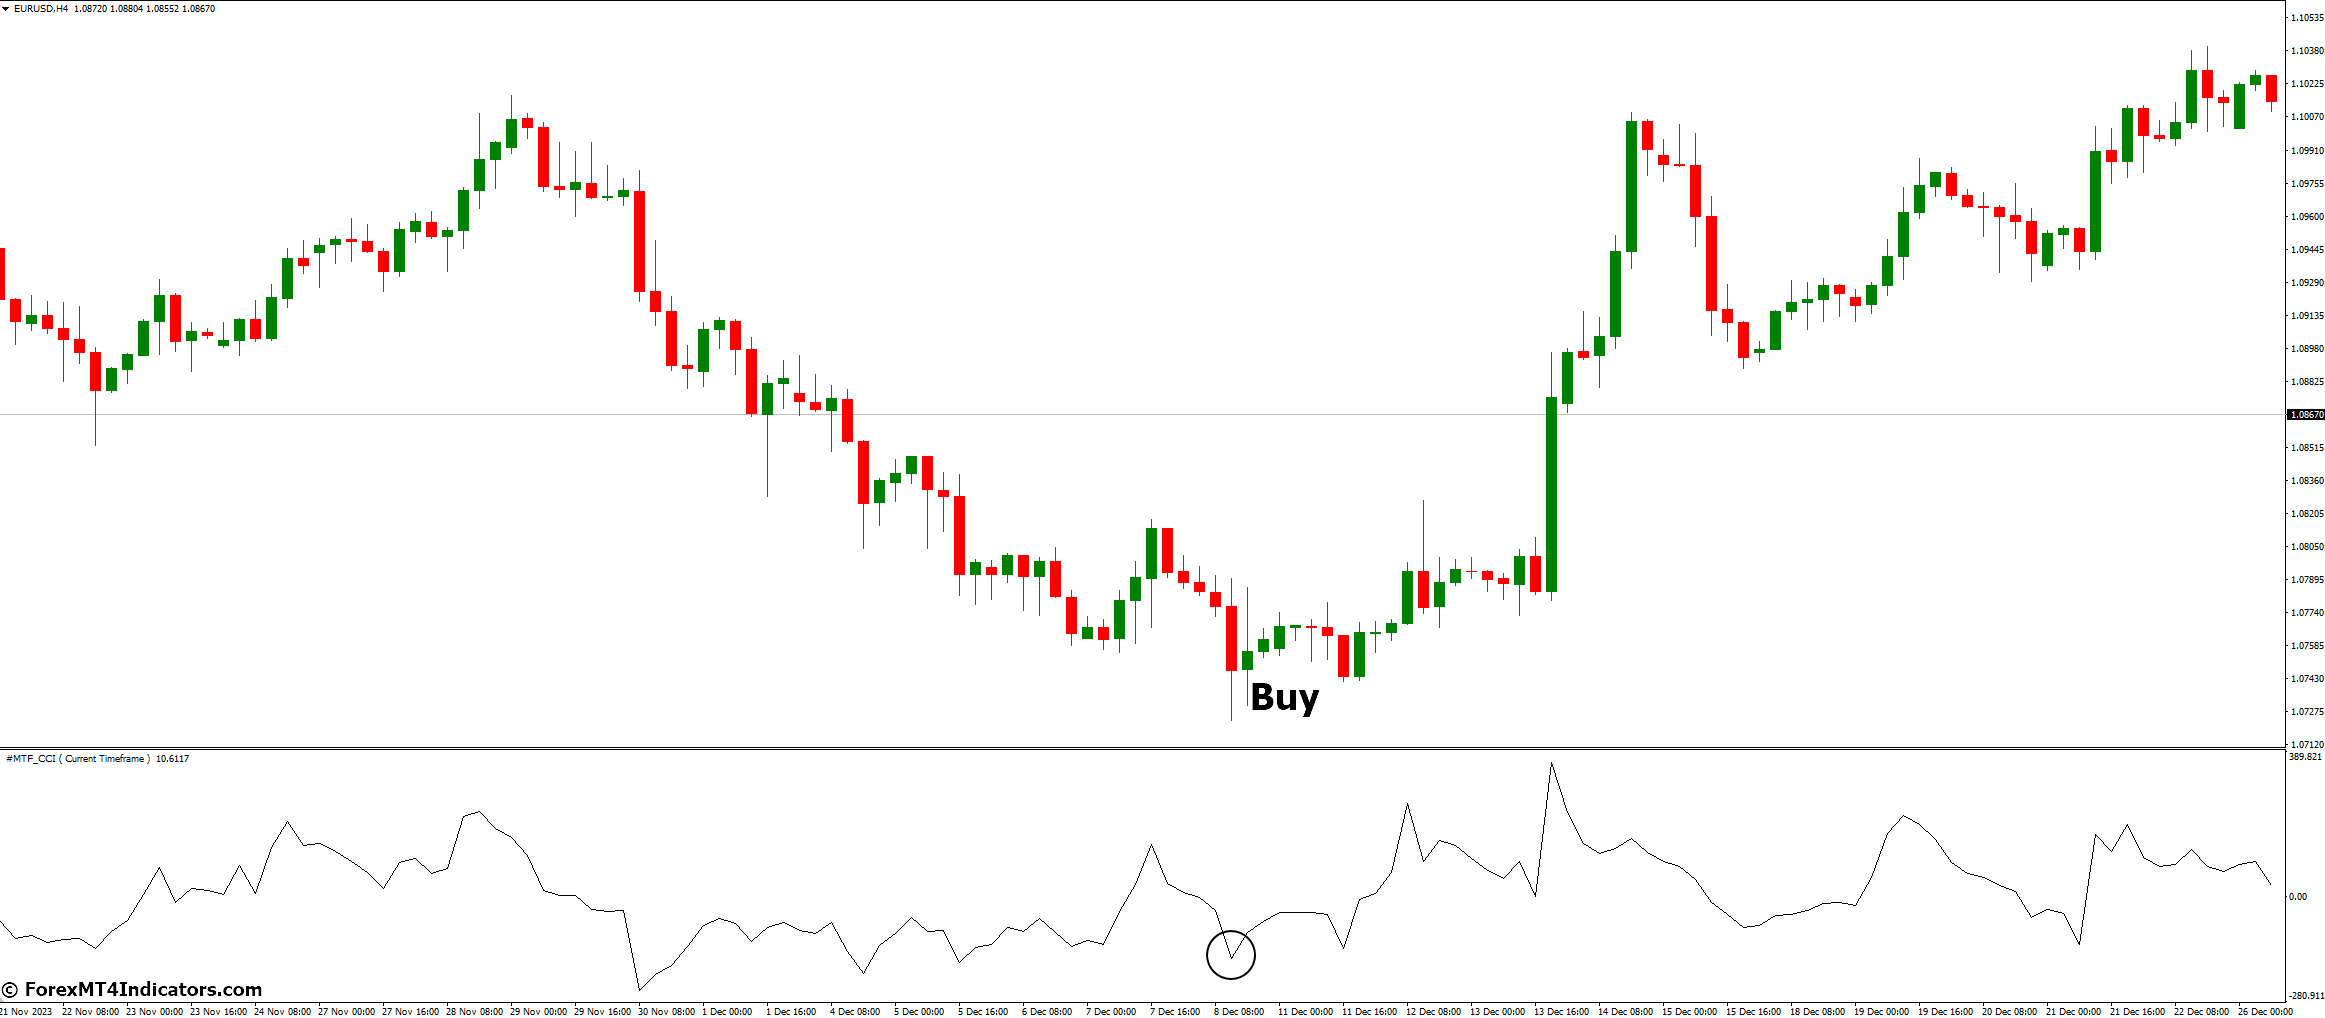  How to Trade with MTF CCI Indicator - Buy Entry